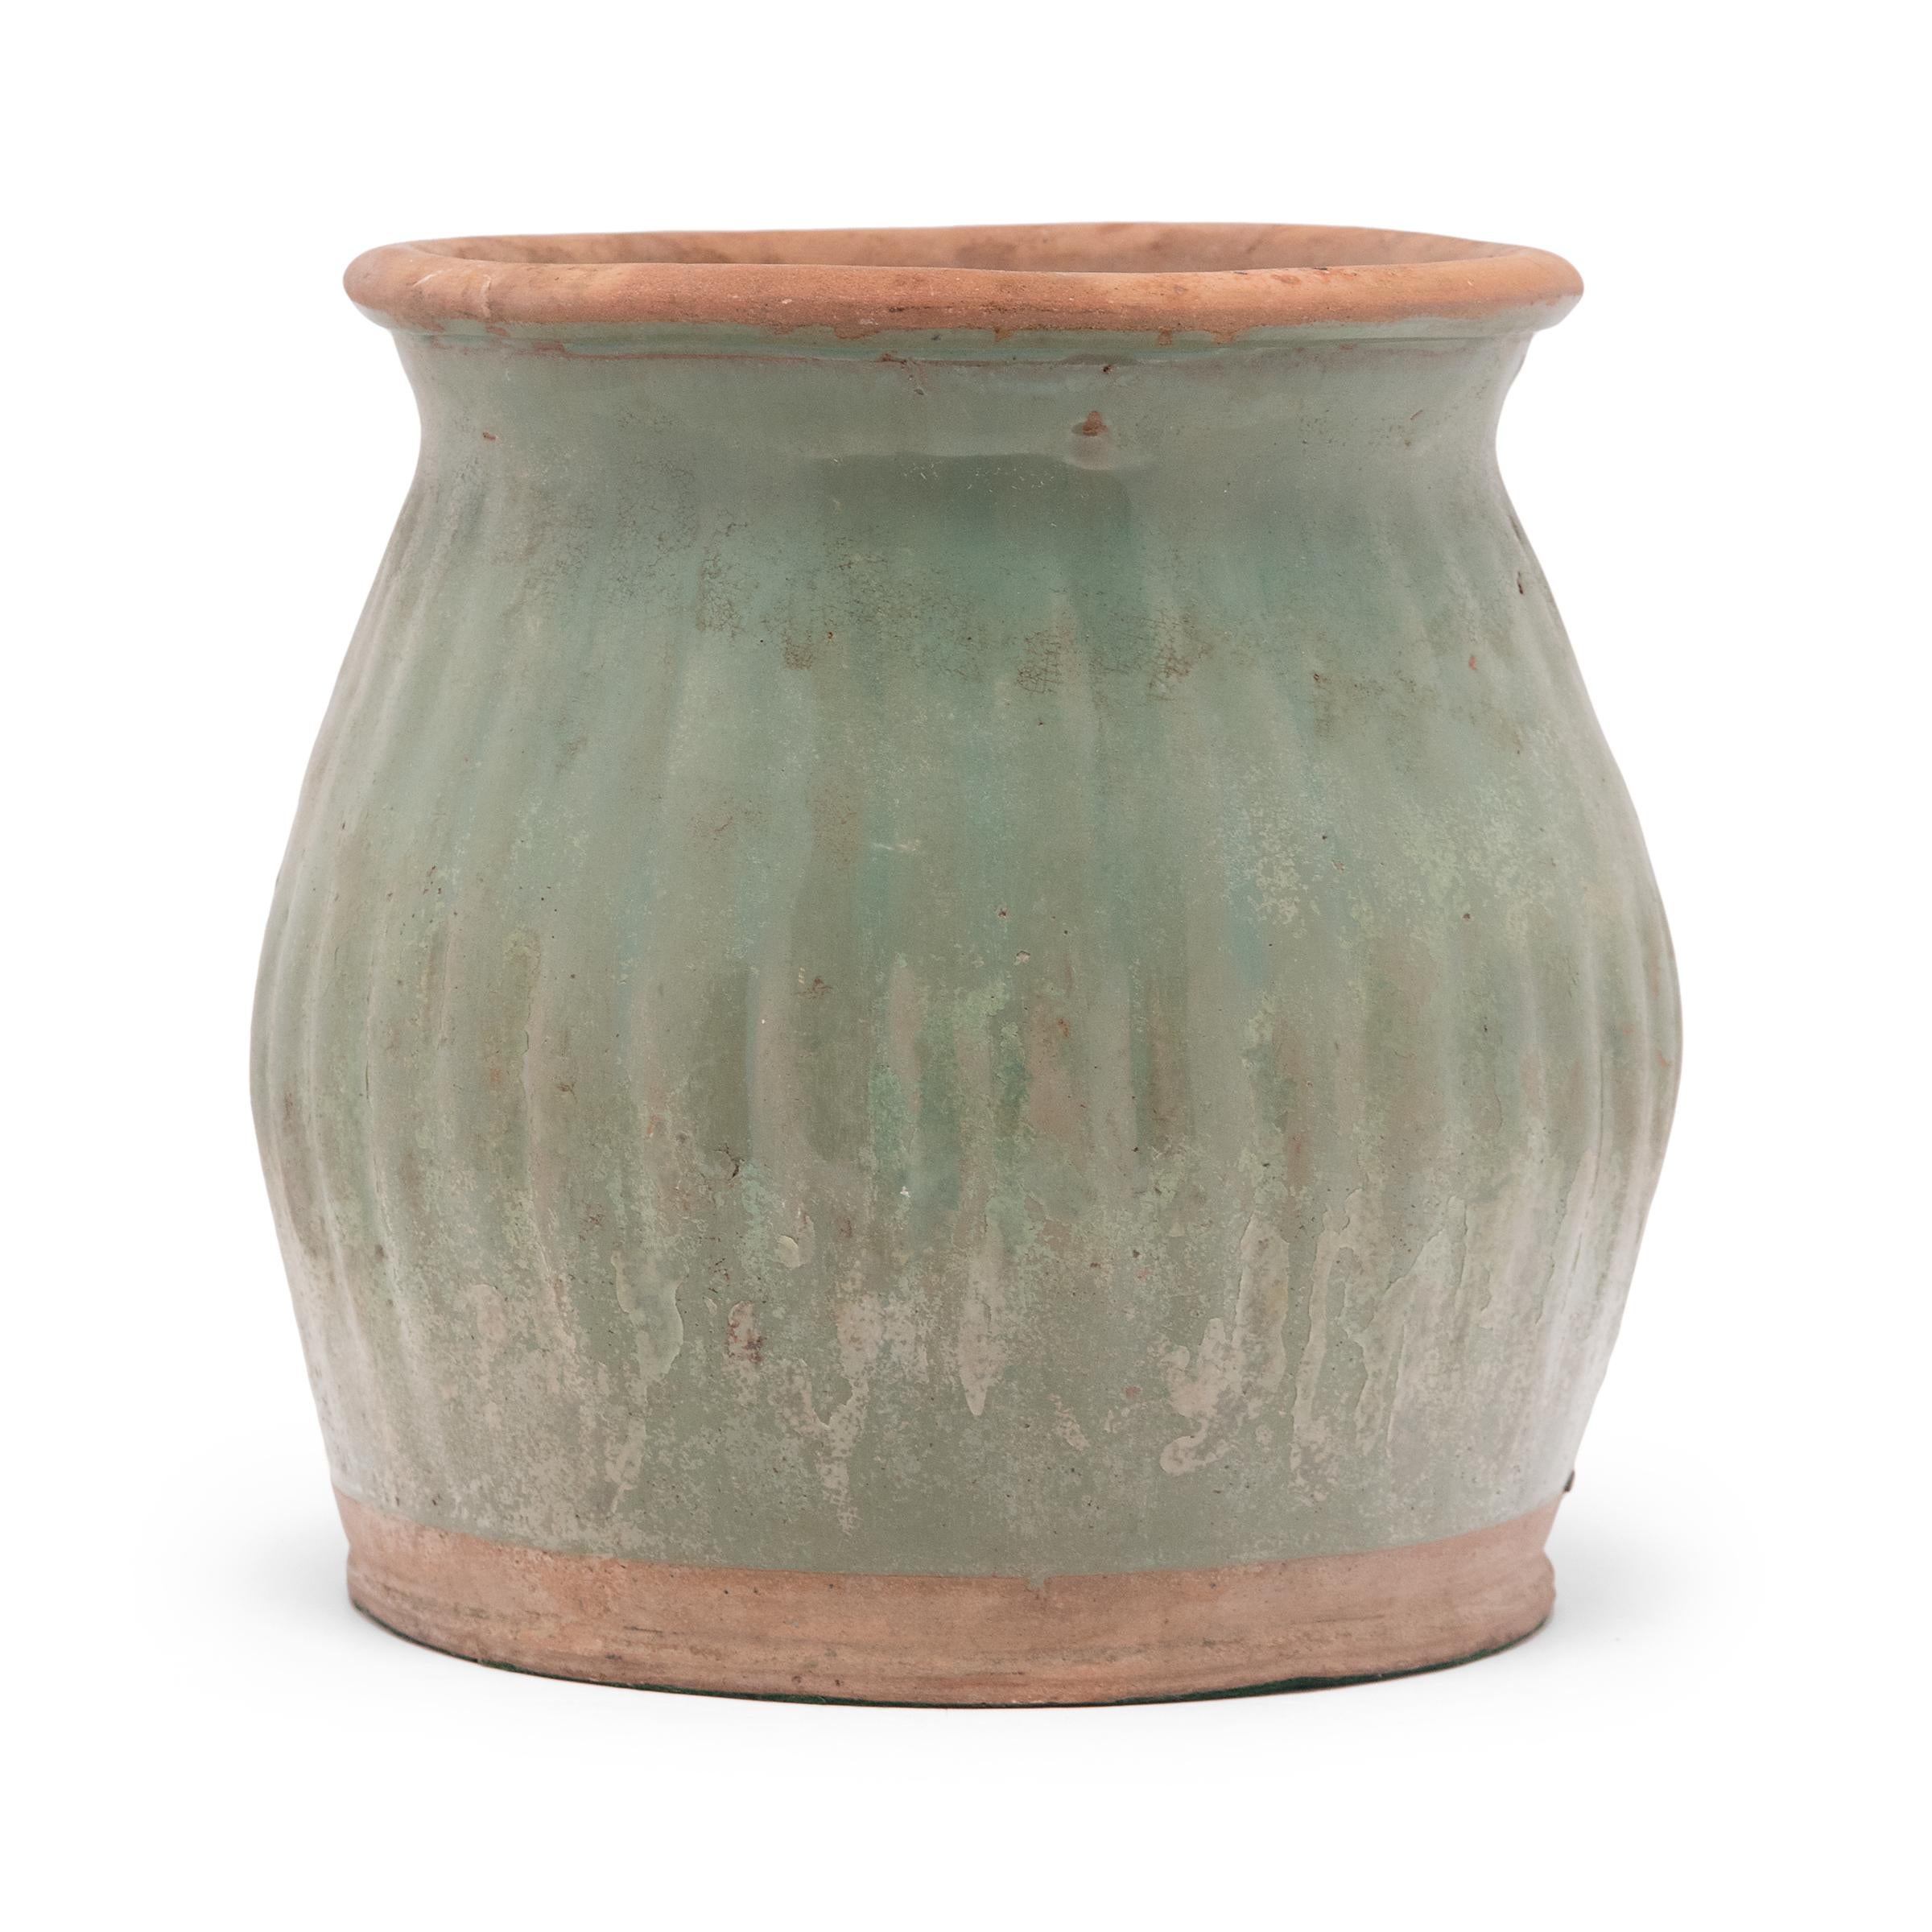 Dated to the early 20th century, this glazed ceramic jar features a flared lip and bulbous sides textured by a pattern of ridges. A celadon-green glaze coats the swelling sides, beautifully aged with minor crazing and pitted wear. The top opening is